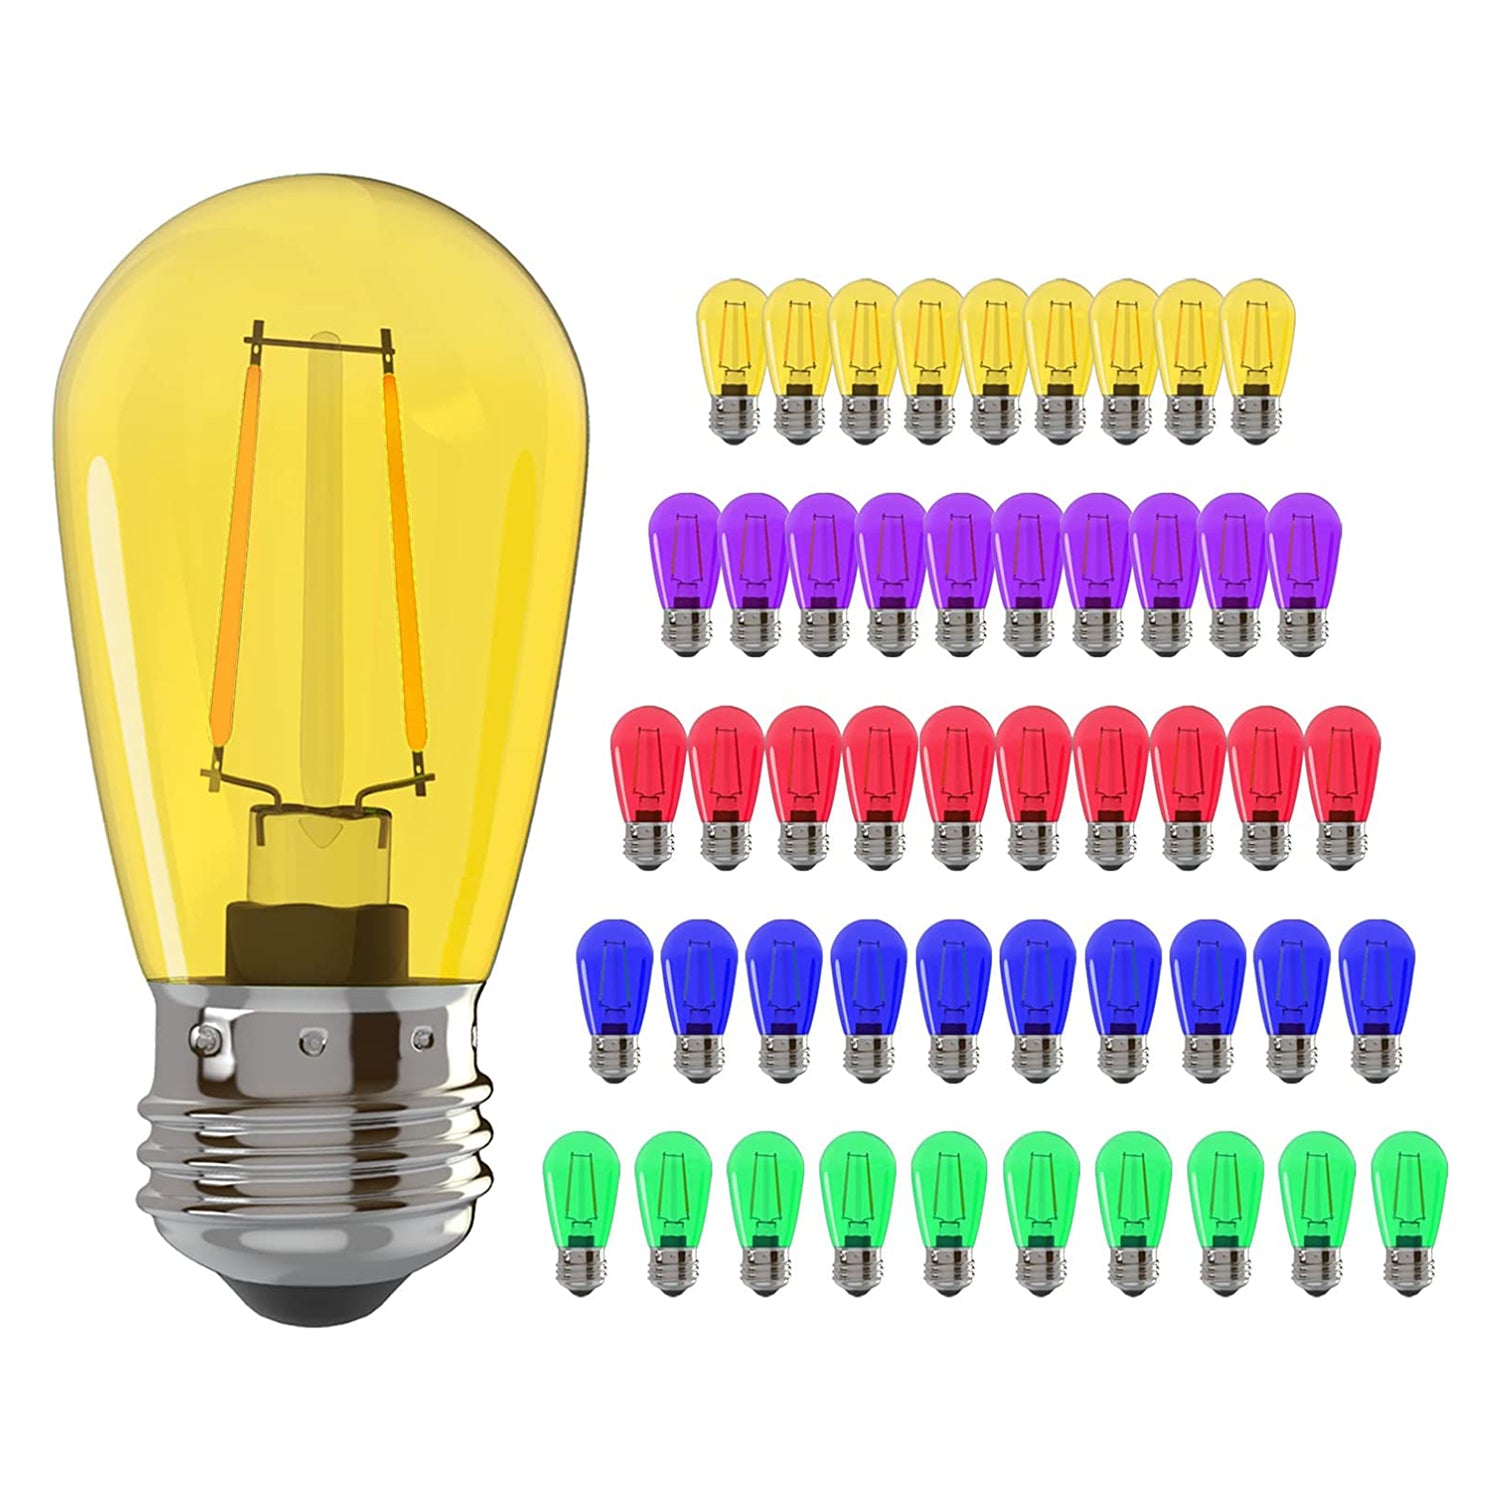 Banord Colored 2W S14 Replacement LED Bulbs, 50 Pack 2700K Dimmable RGB Bulbs Outdoor String Lights Vintage Filament LED Edison Light Bulb, Waterproof & Shatterproof E26 Screw Base Multicolor Bulbs